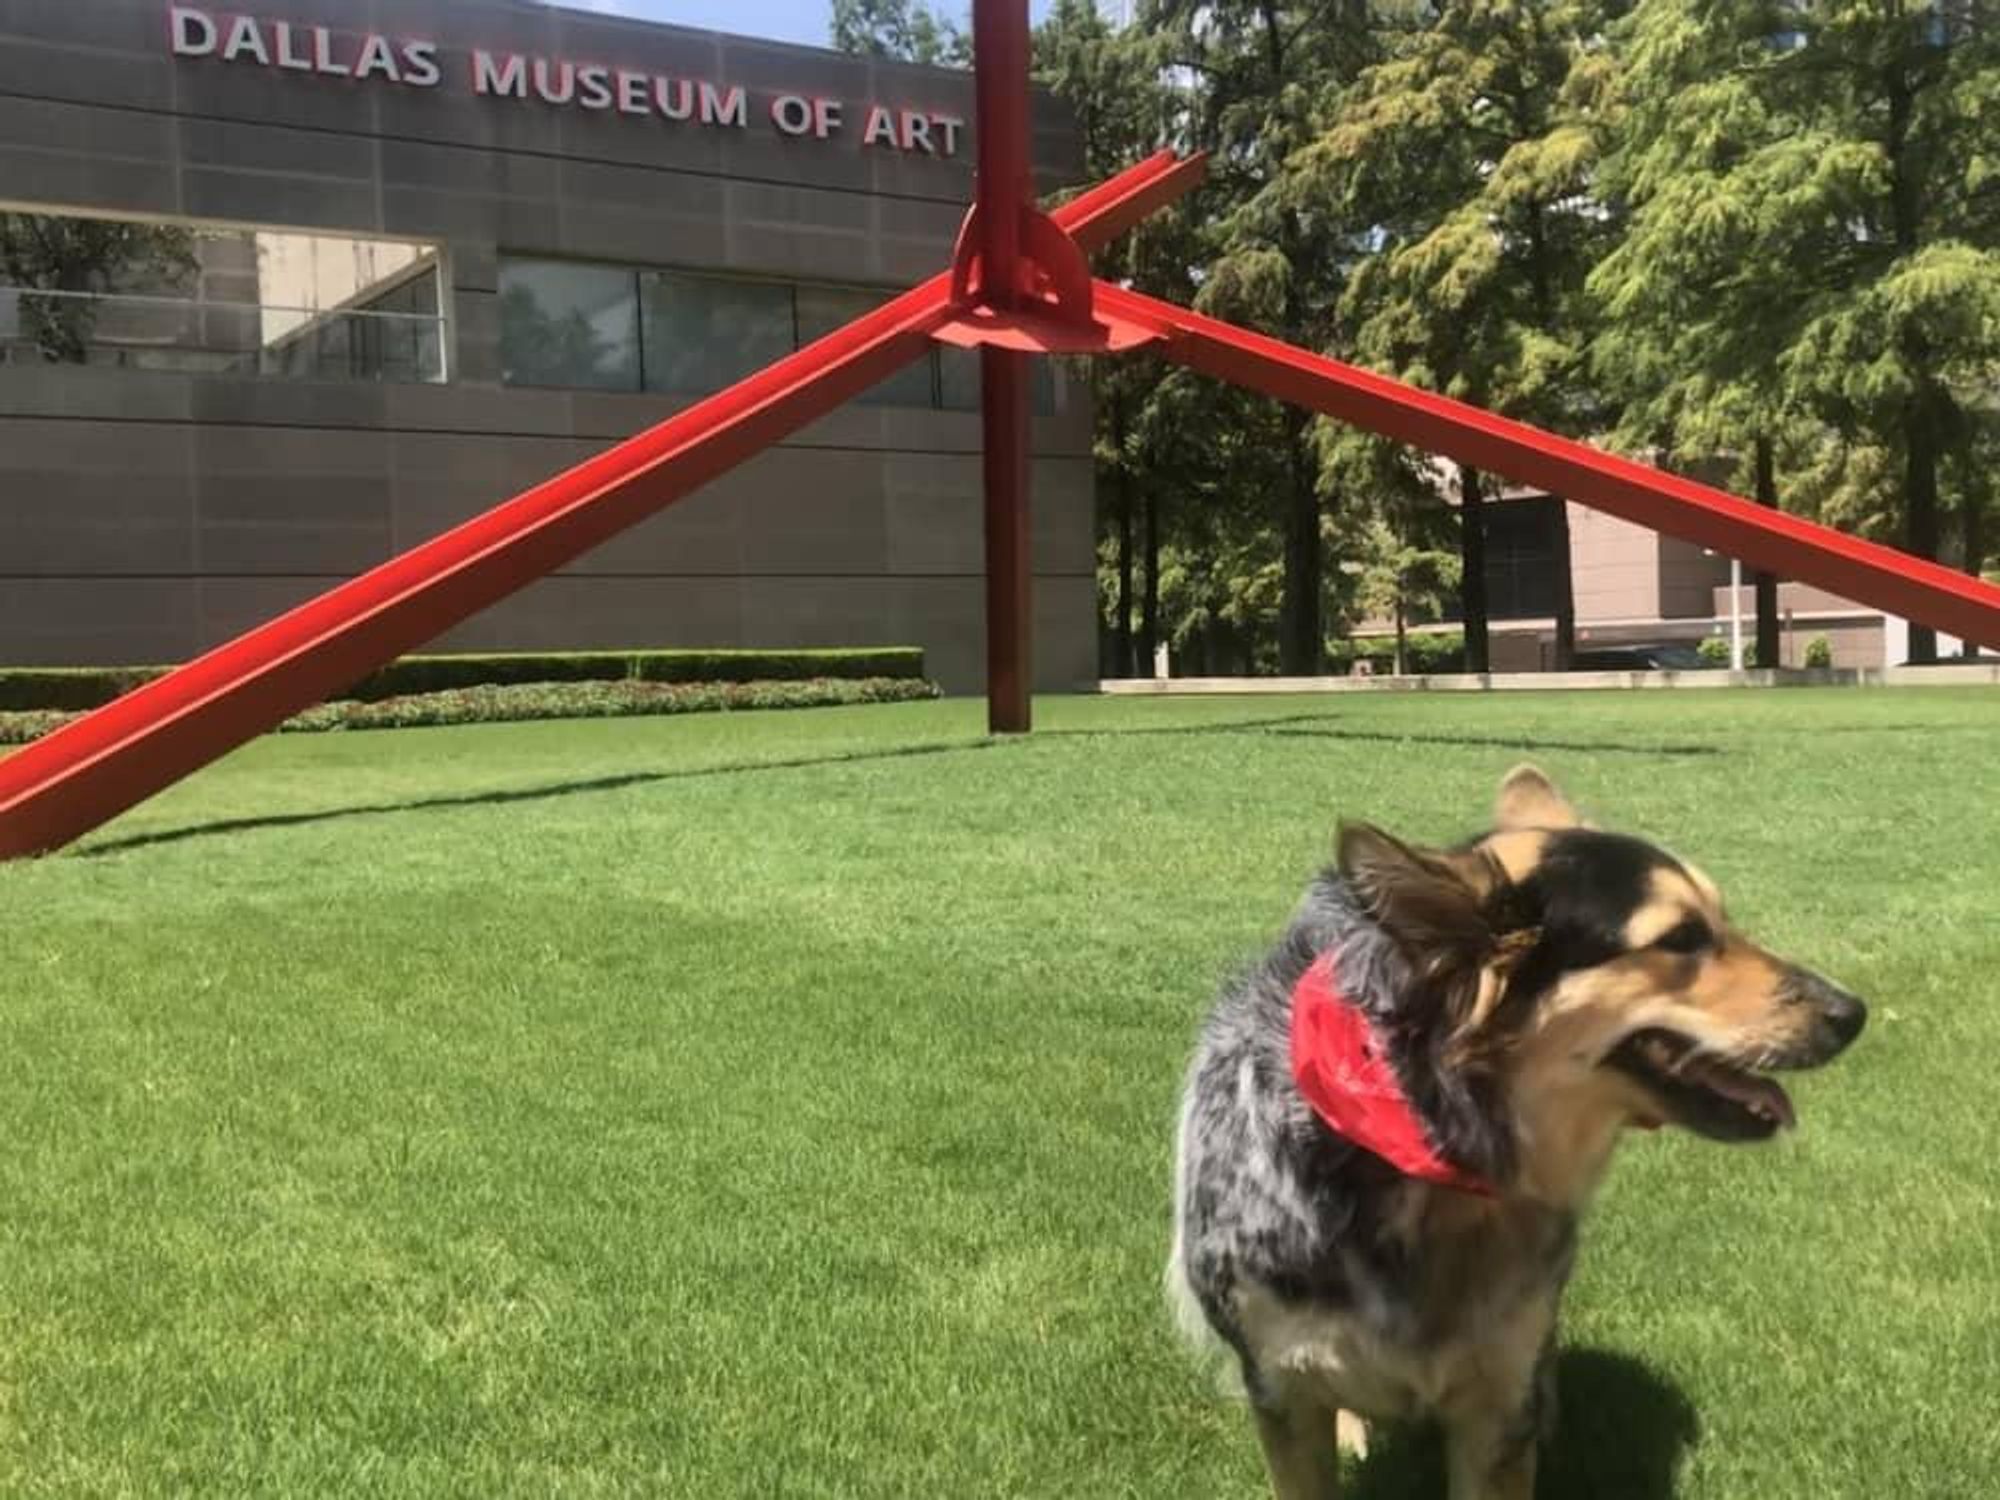 Dallas Museum of Art lawn with dog